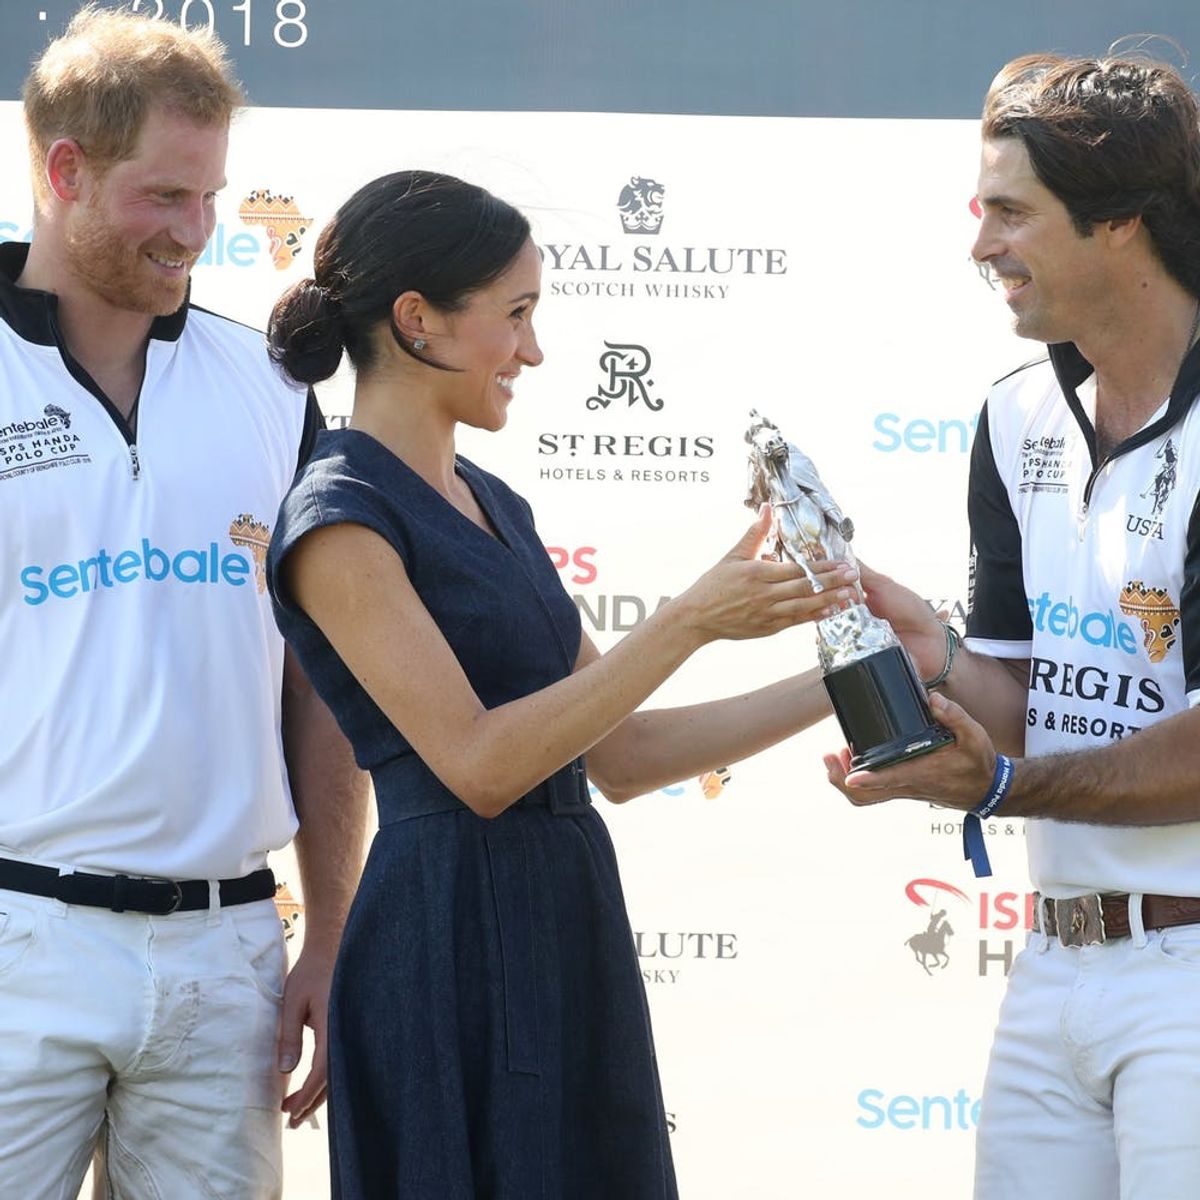 Prince Harry and Meghan Markle ‘Found Each Other to Change the World,’ Nacho Figueras Says